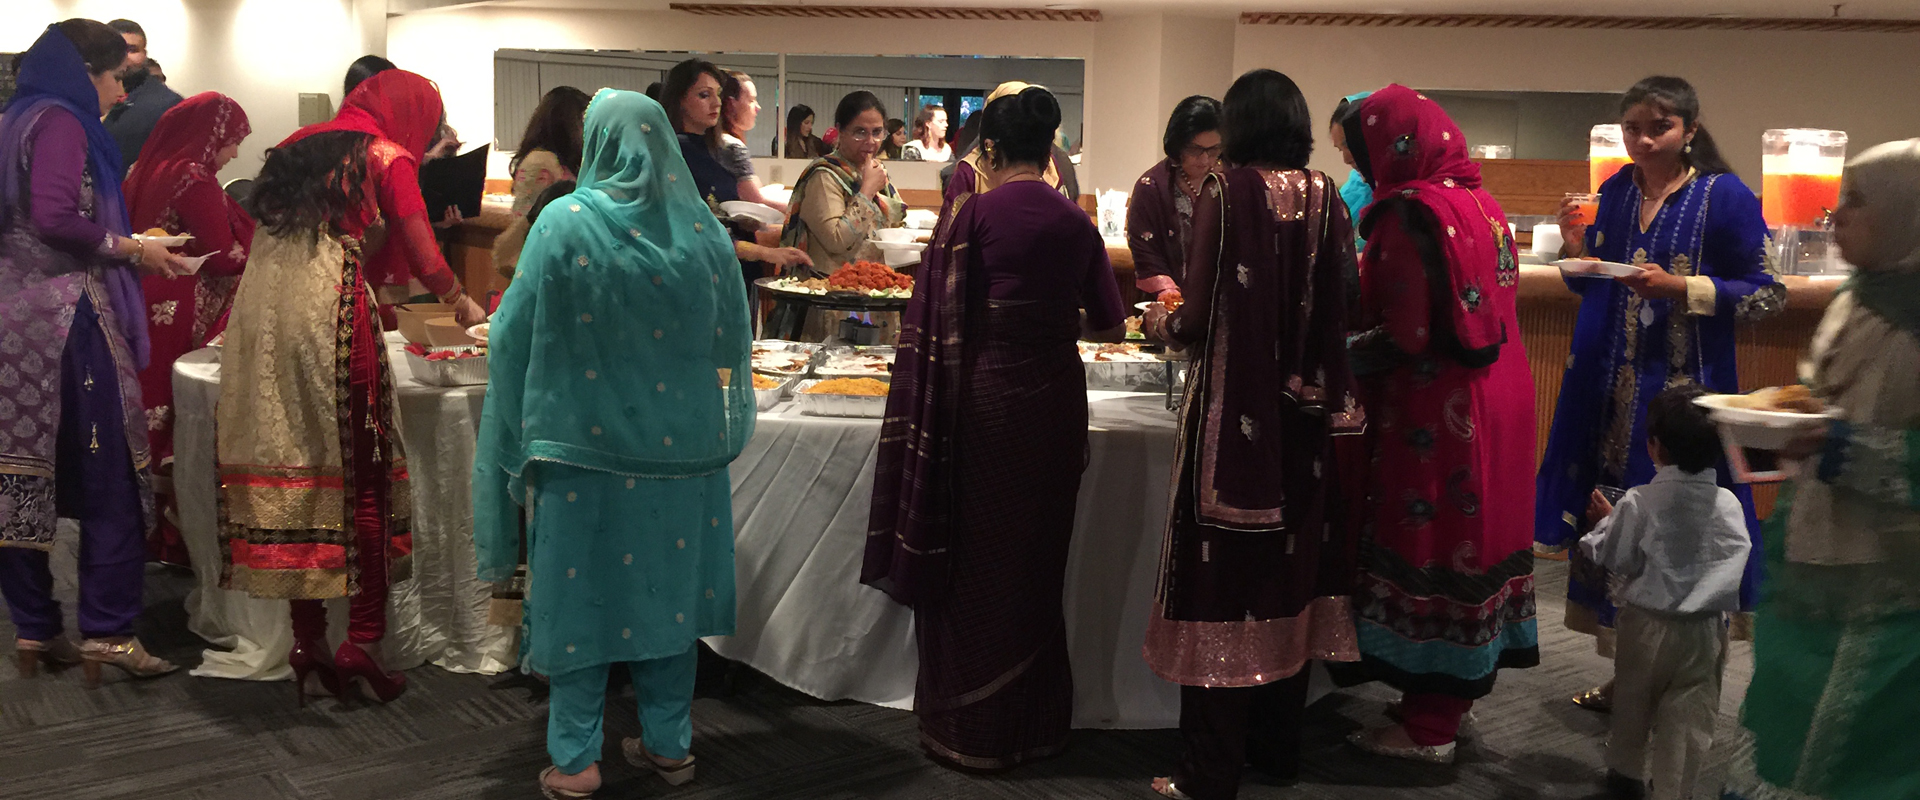 Jaipur Indian Cuisine Catering Guests